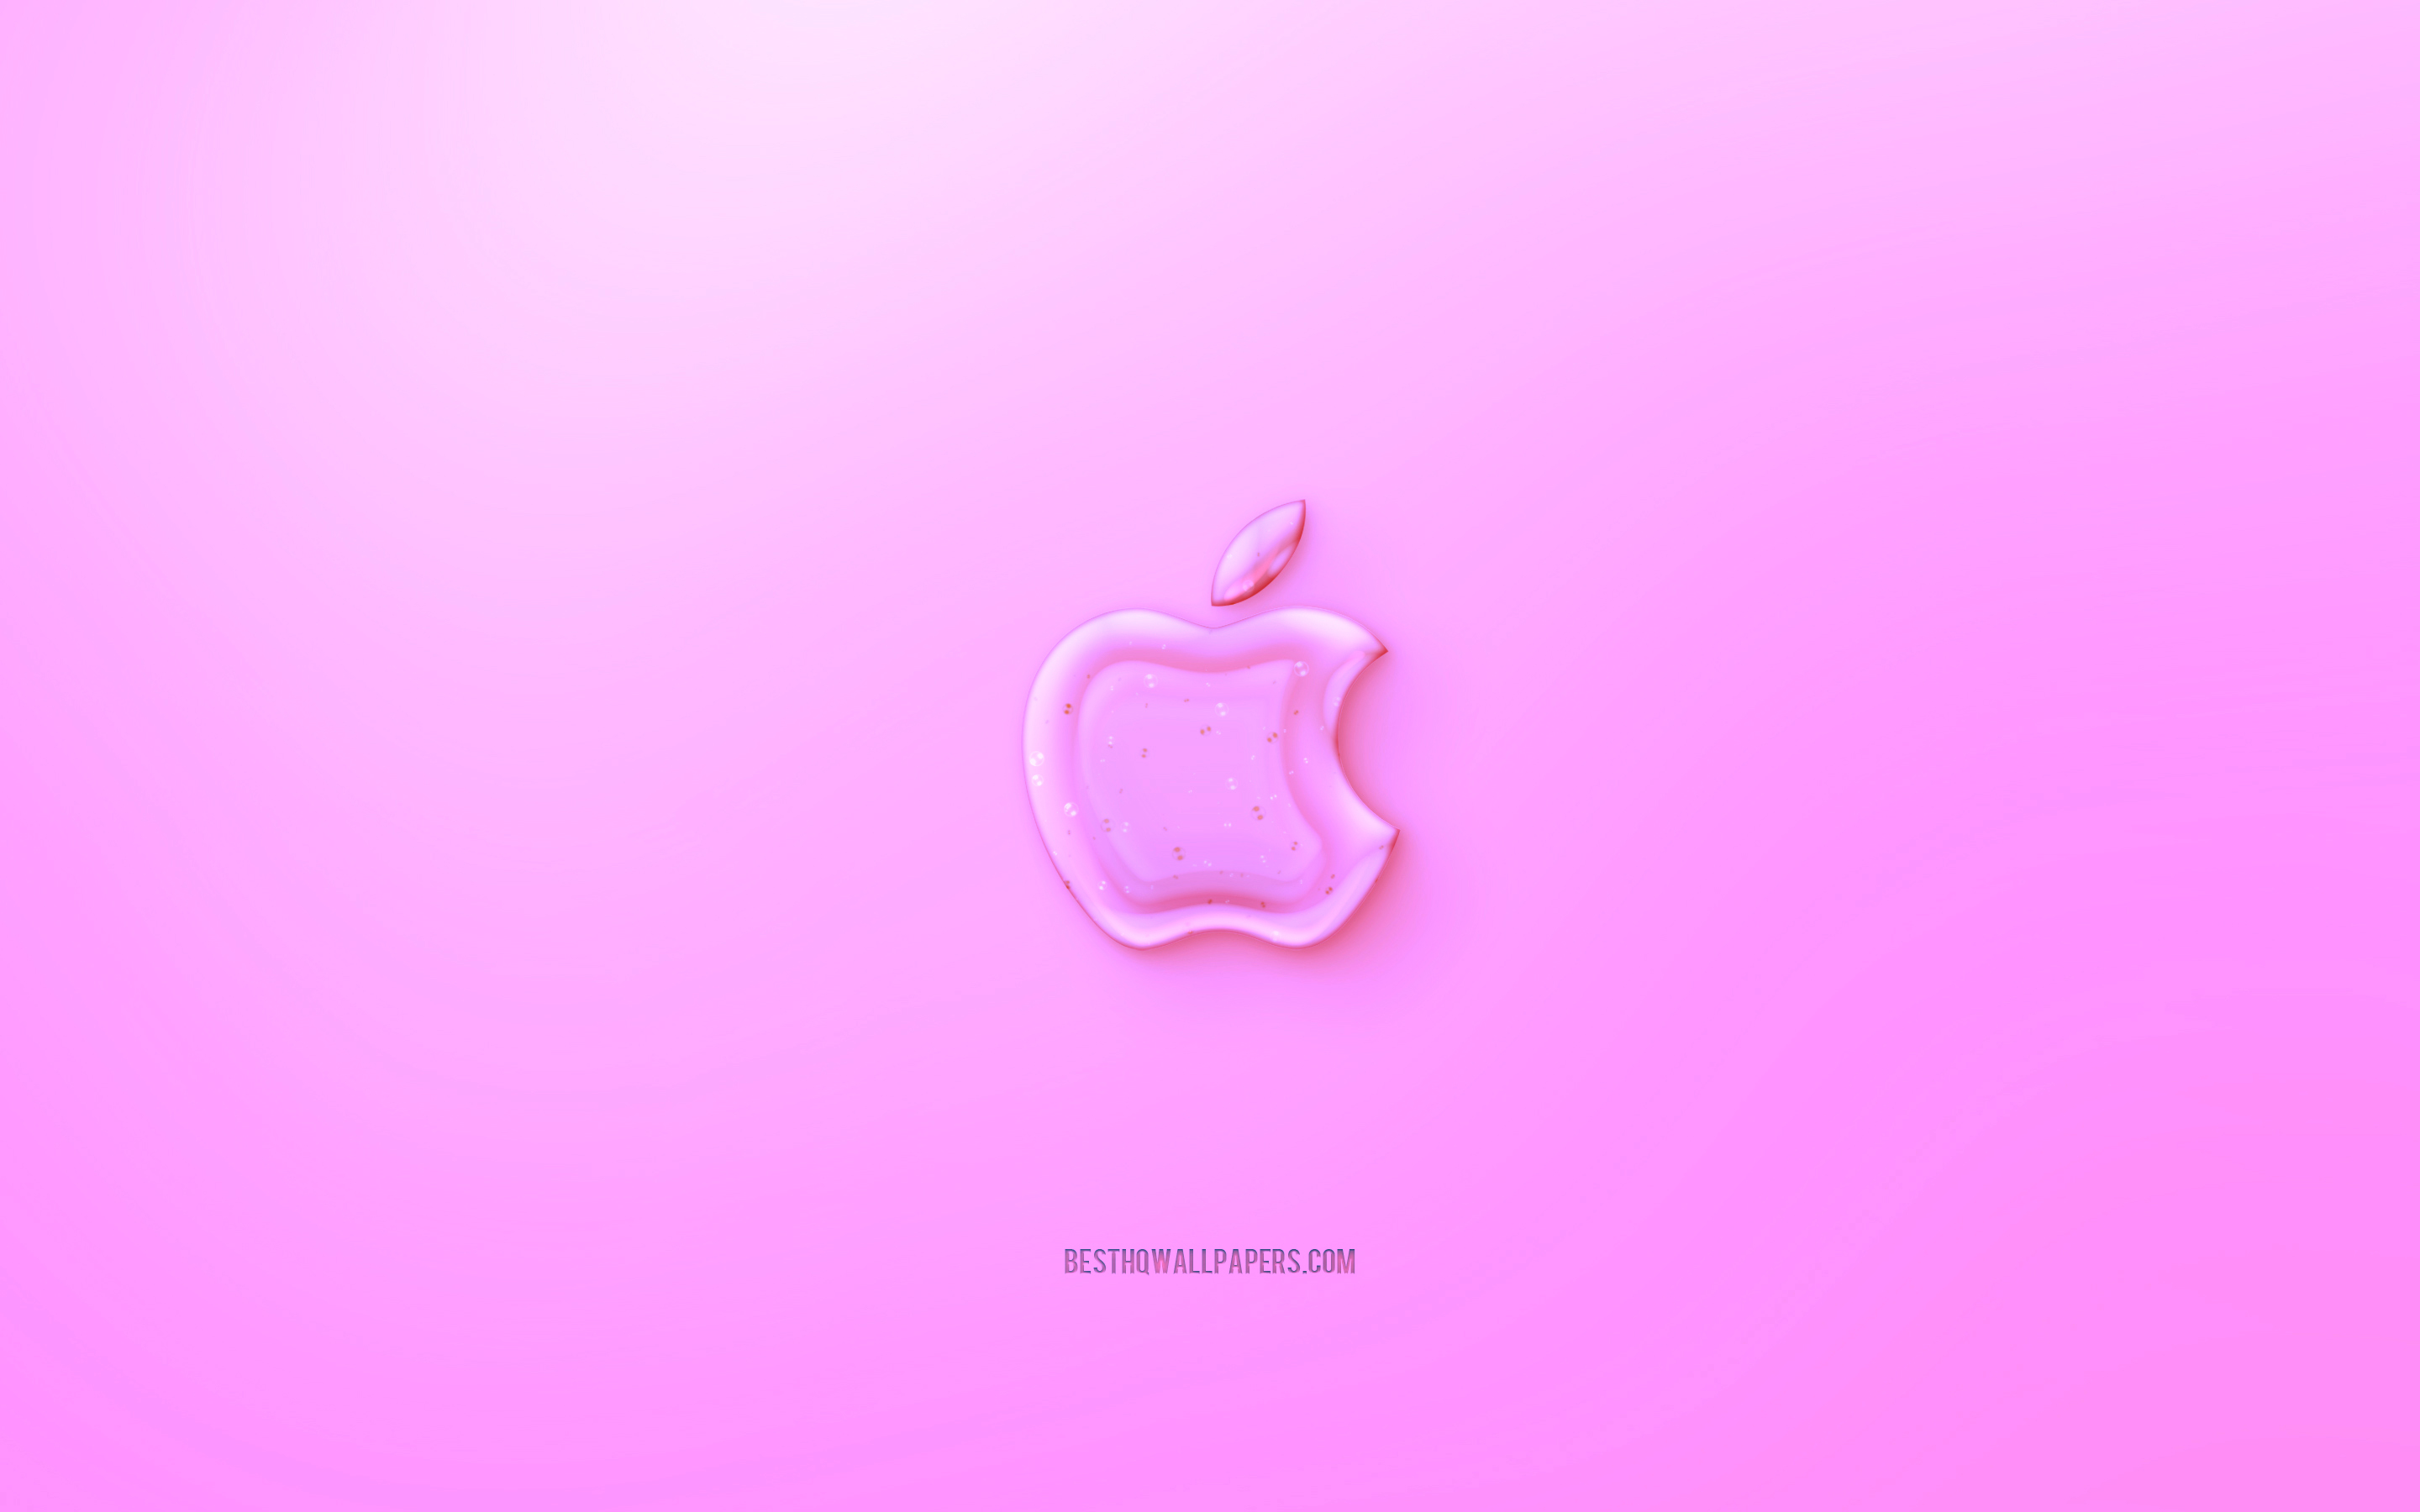 Download wallpaper Apple 3D logo, Pink background, Pink Apple jelly logo, Apple emblem, creative 3D art, Apple for desktop with resolution 2880x1800. High Quality HD picture wallpaper